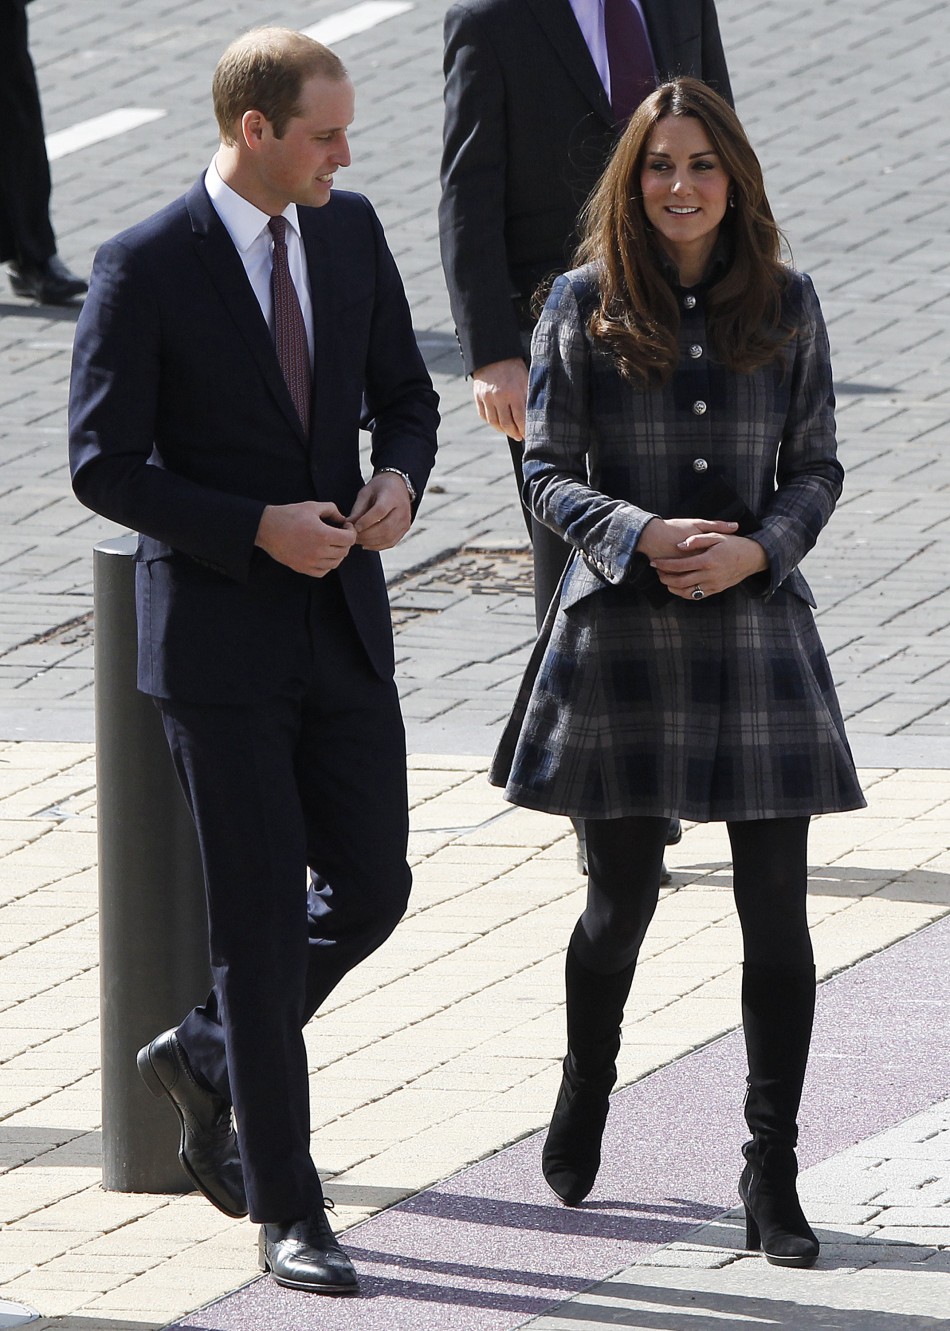 Britains Prince William and his wife Catherine, Duchess of Cambridge arrive for their visit to the Emirates Arena in Glasgow, Scotland April 4, 2013